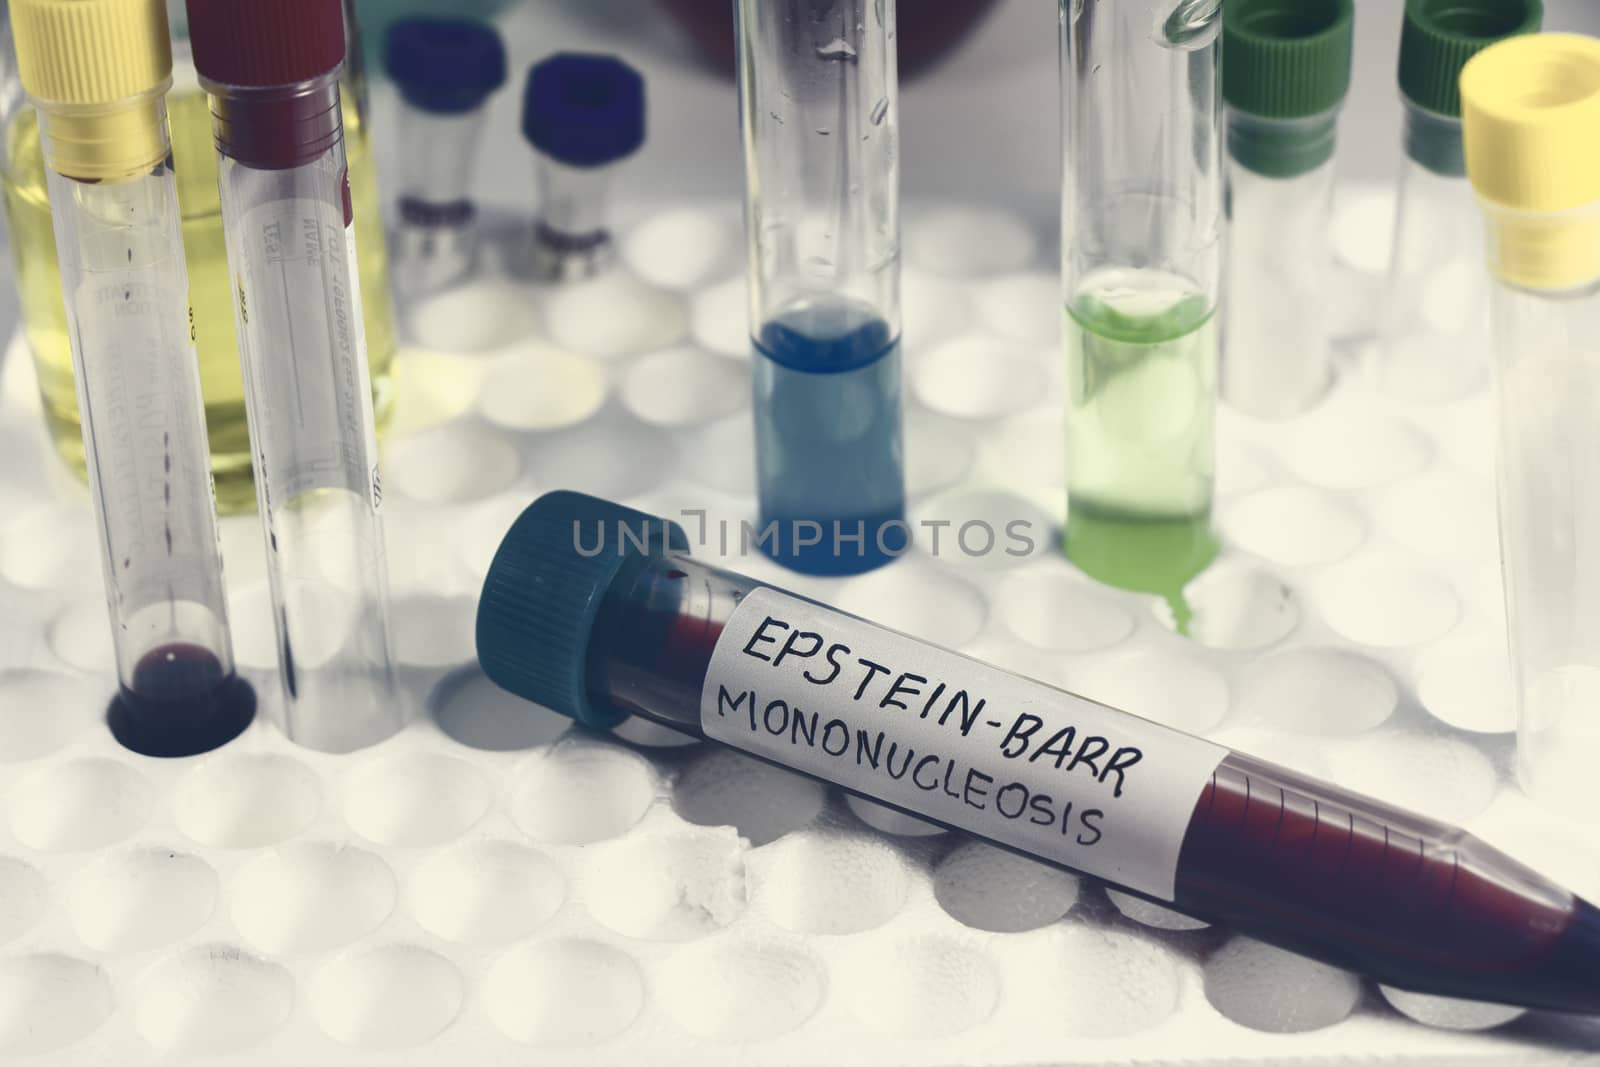 Mononucleosis and Epstein-barr virus blood test sample in lab by Taidundua